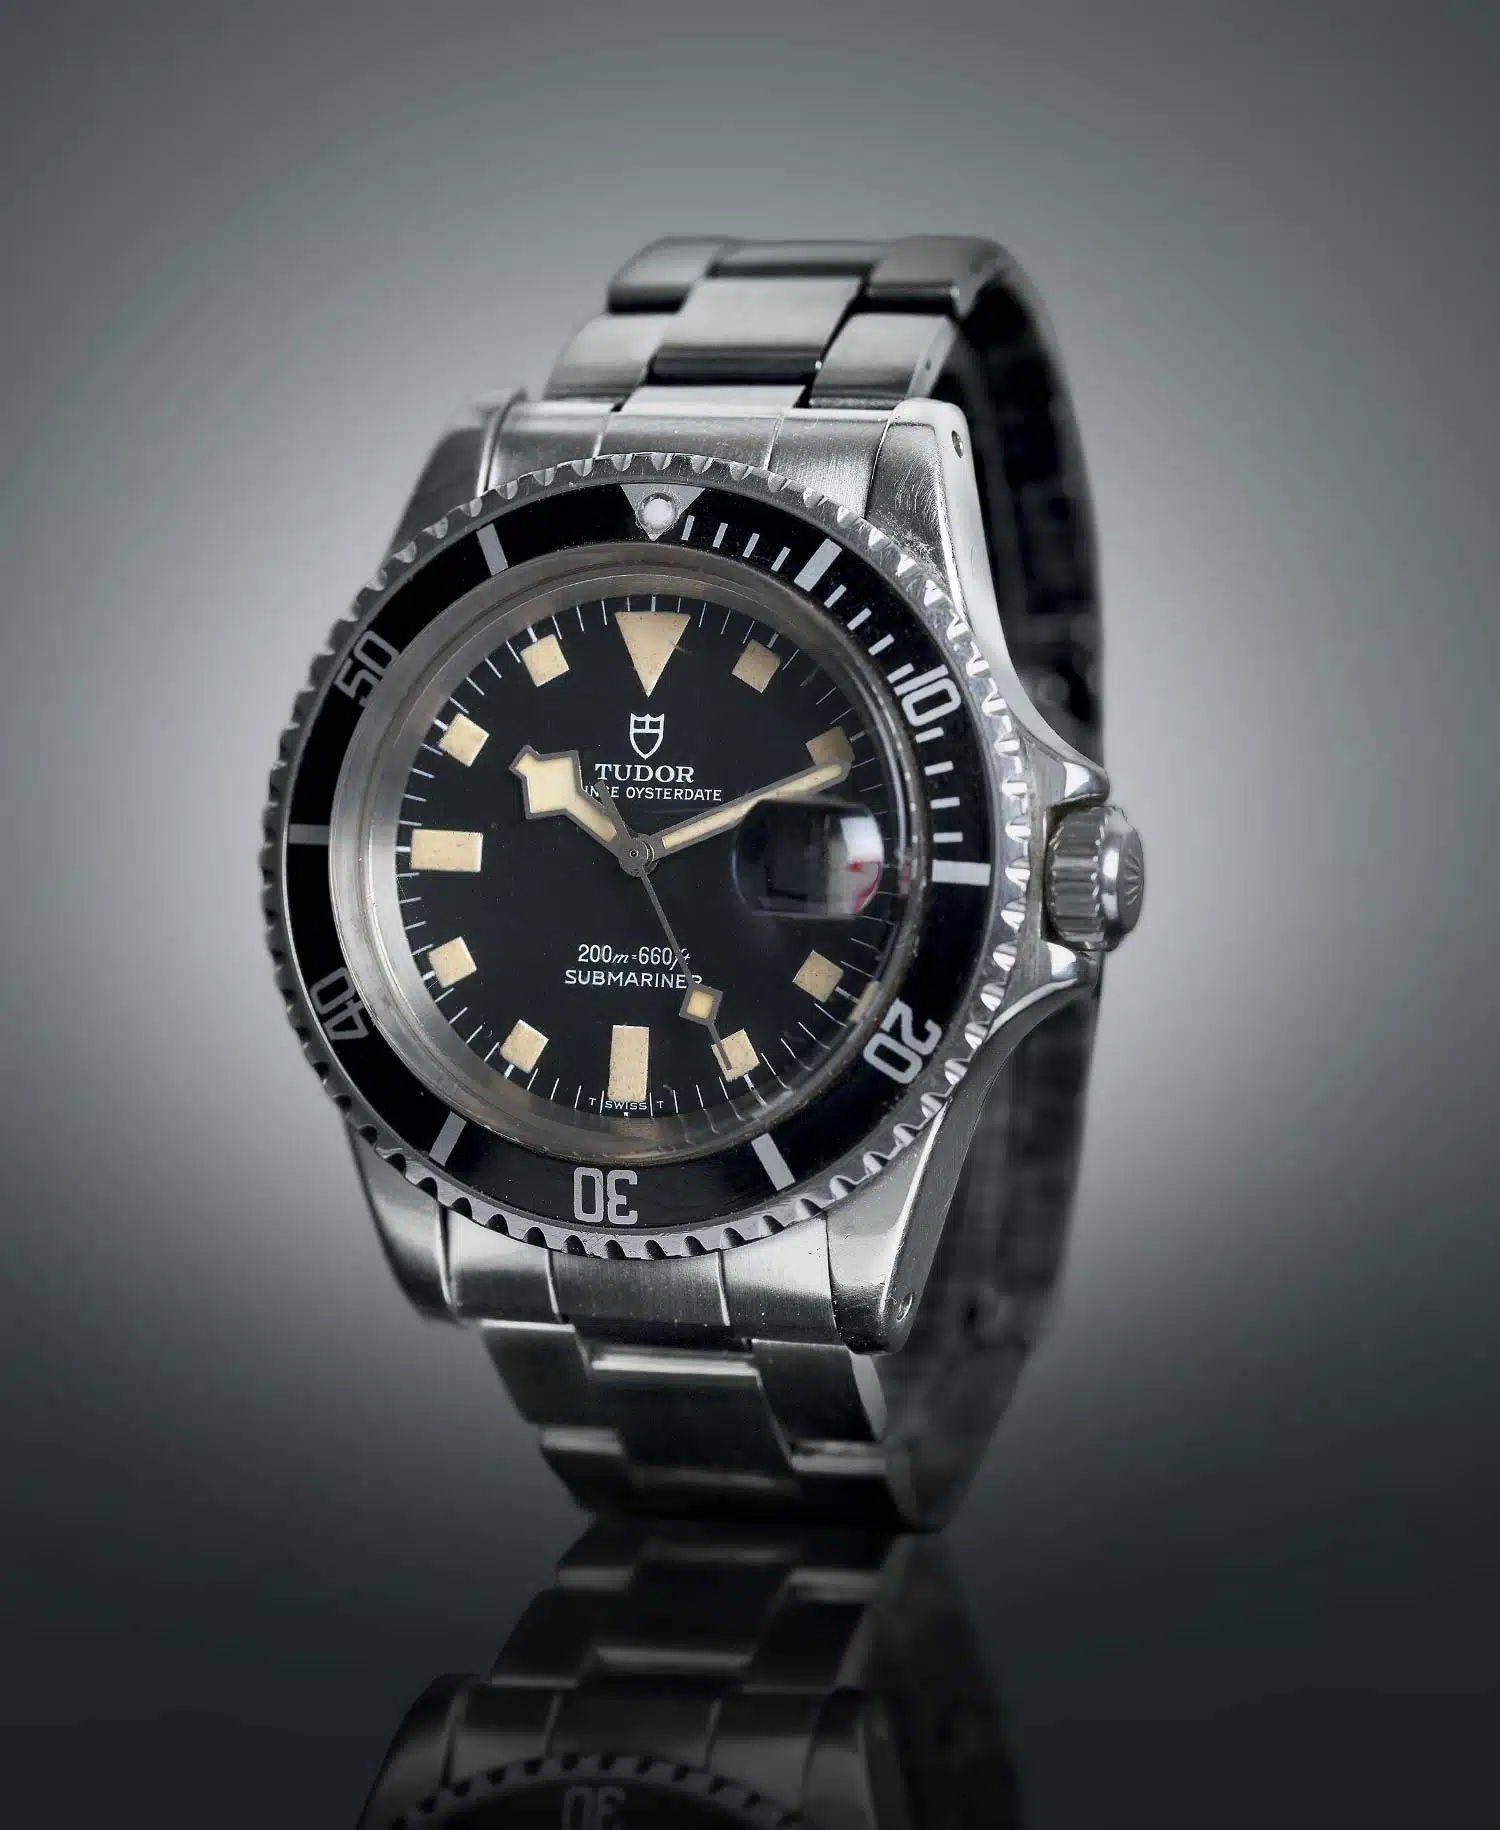 TUDOR Prince Oysterdate Submariner watch, article 7021